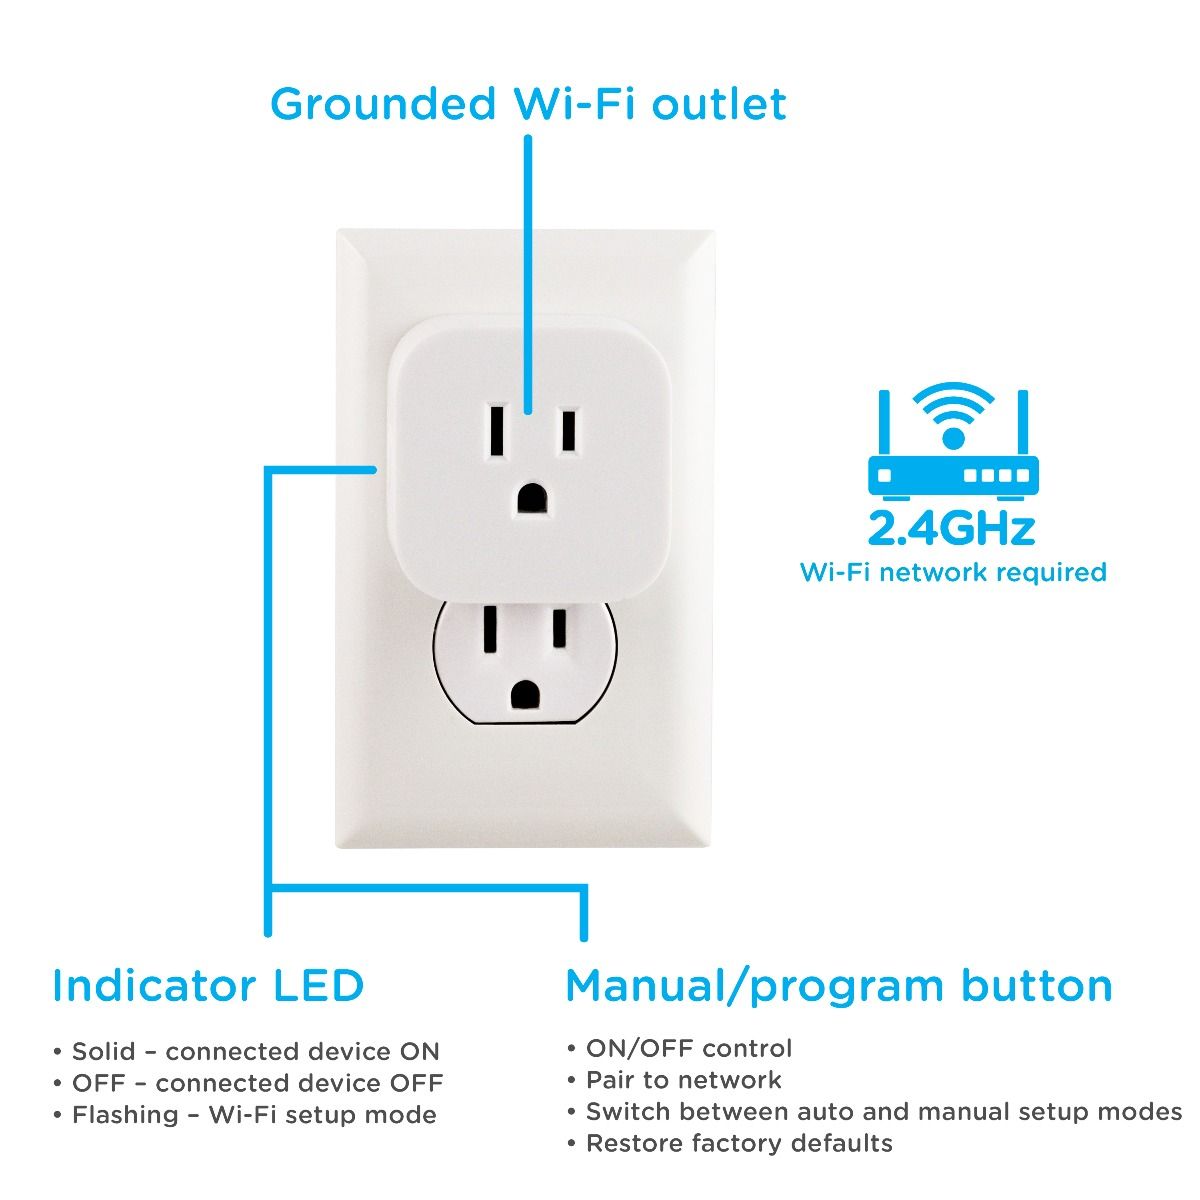 Enbrighten WiFi Plug On Off Smart Switch, 2 Pack - evergreenly